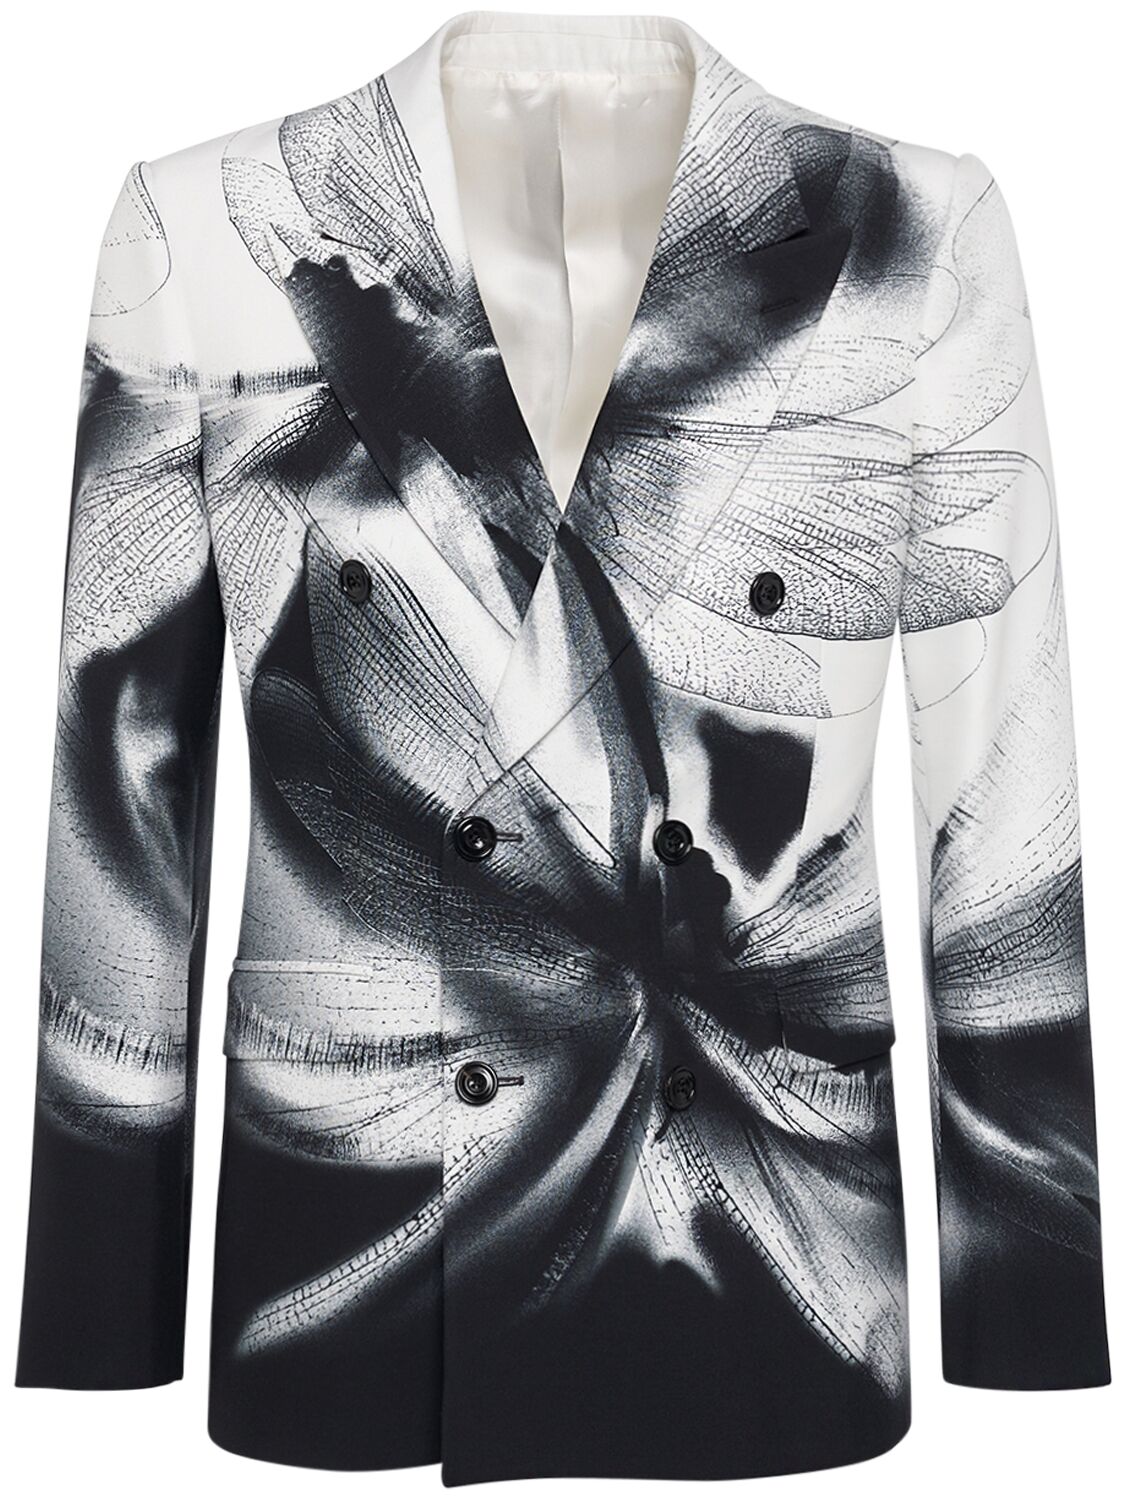 Alexander Mcqueen Dragonfly Shadow Printed Viscose Jacket In Black/white